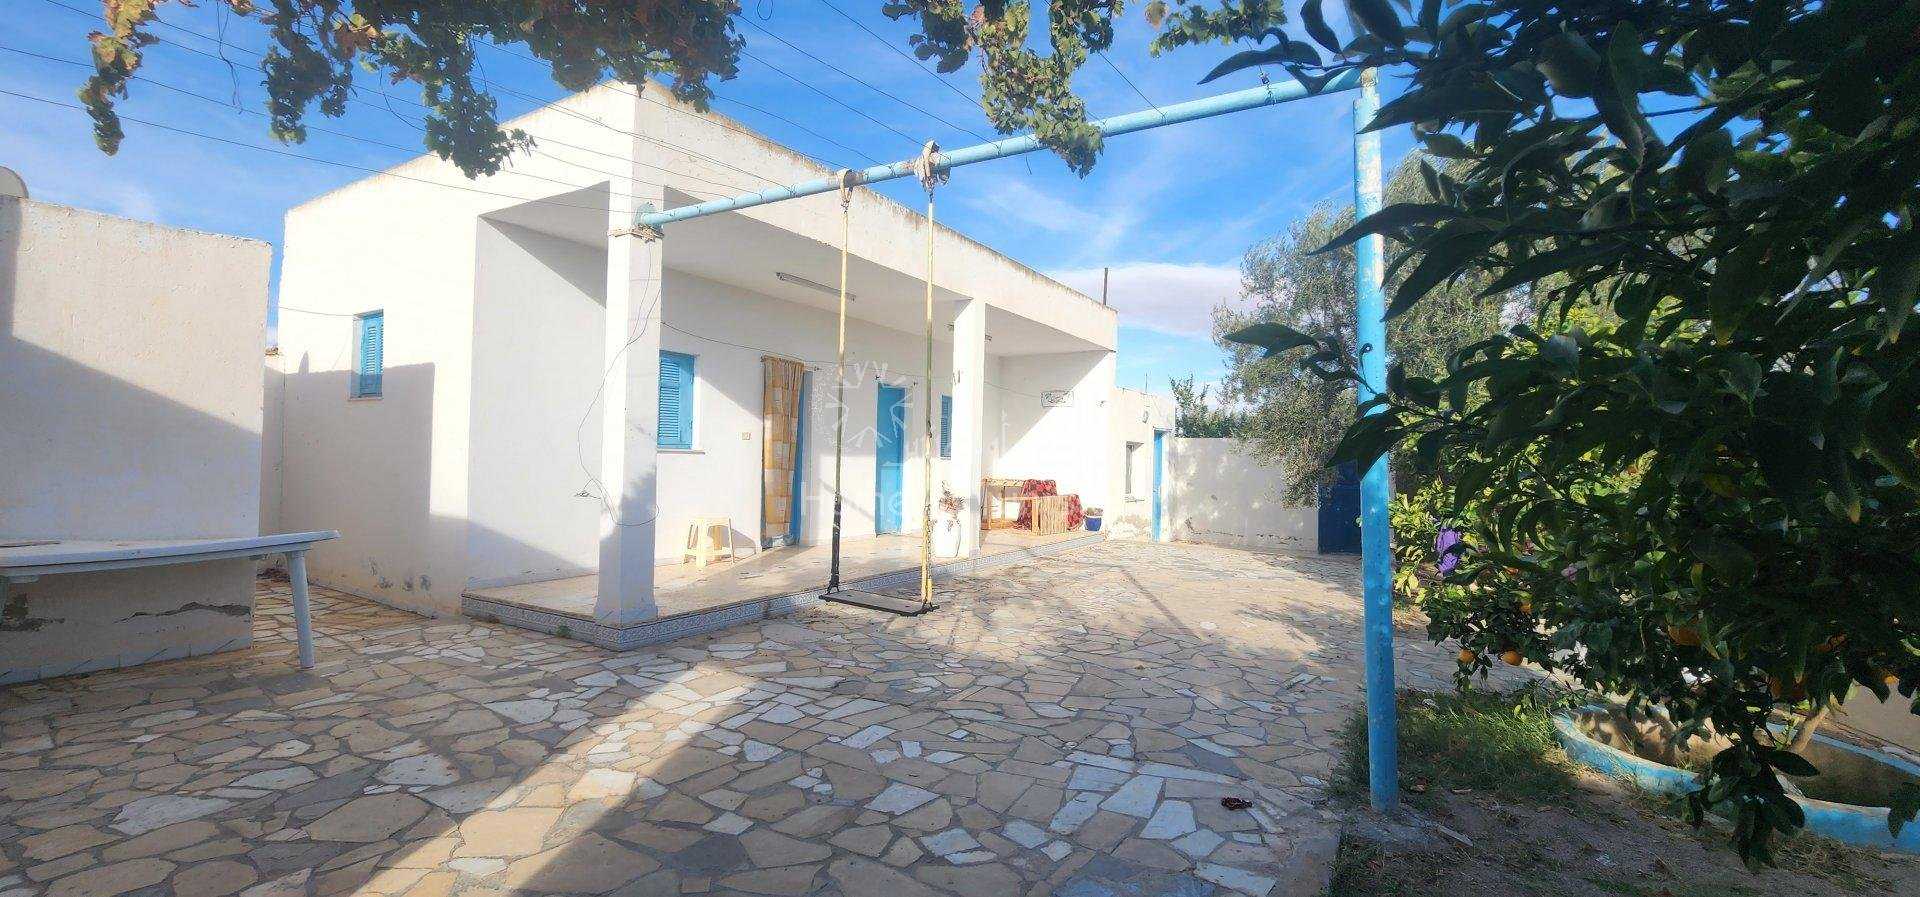 House in Dar ech Chaouch Abd Alla, Sousse 11146139